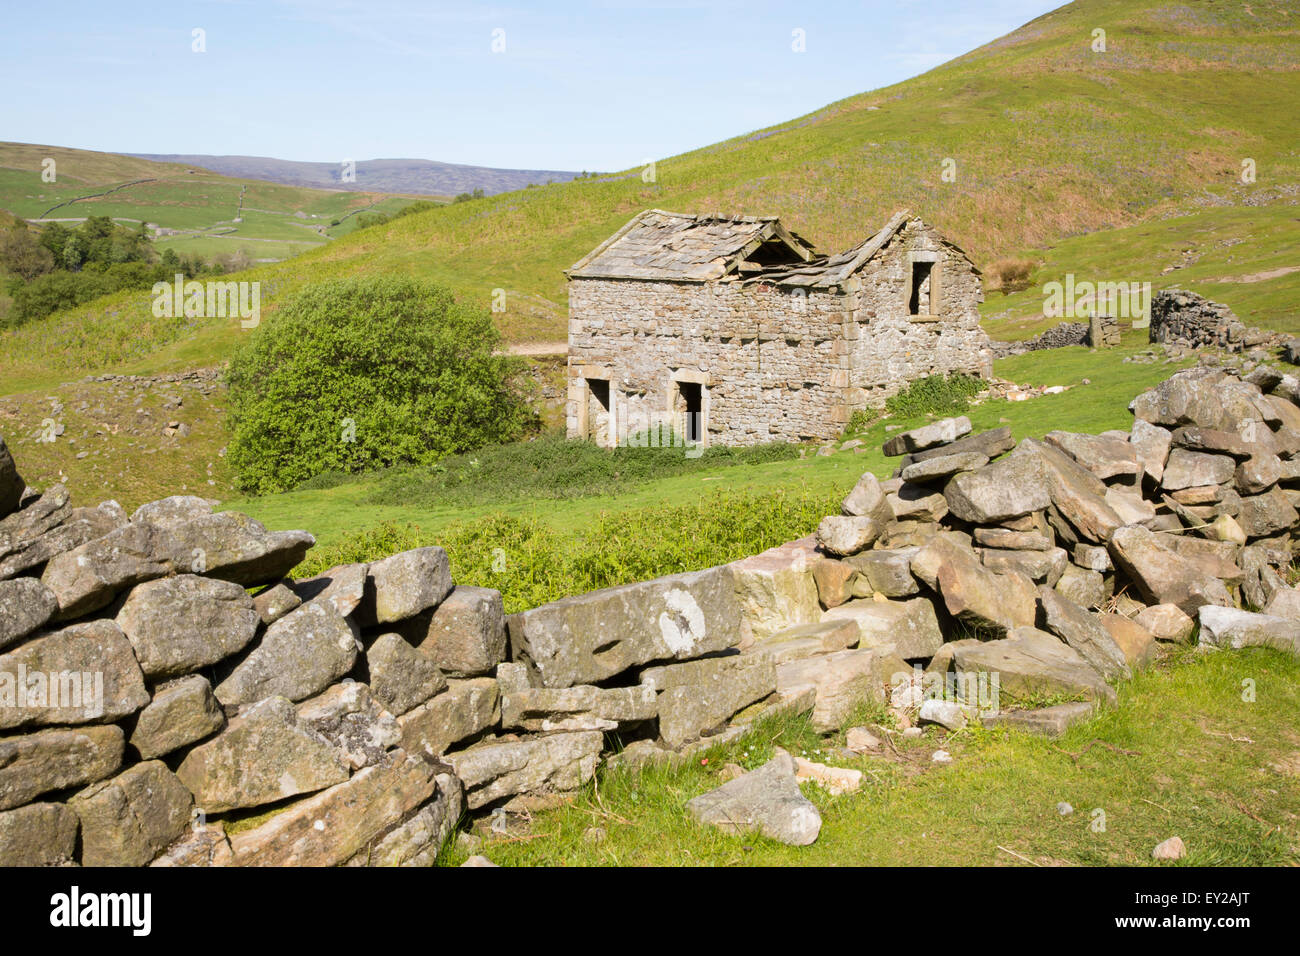 Dilapidated stone barn and drystone wall, Swaledale, Yorkshire Dales National Park, North Yorkshire, England, UK Stock Photo